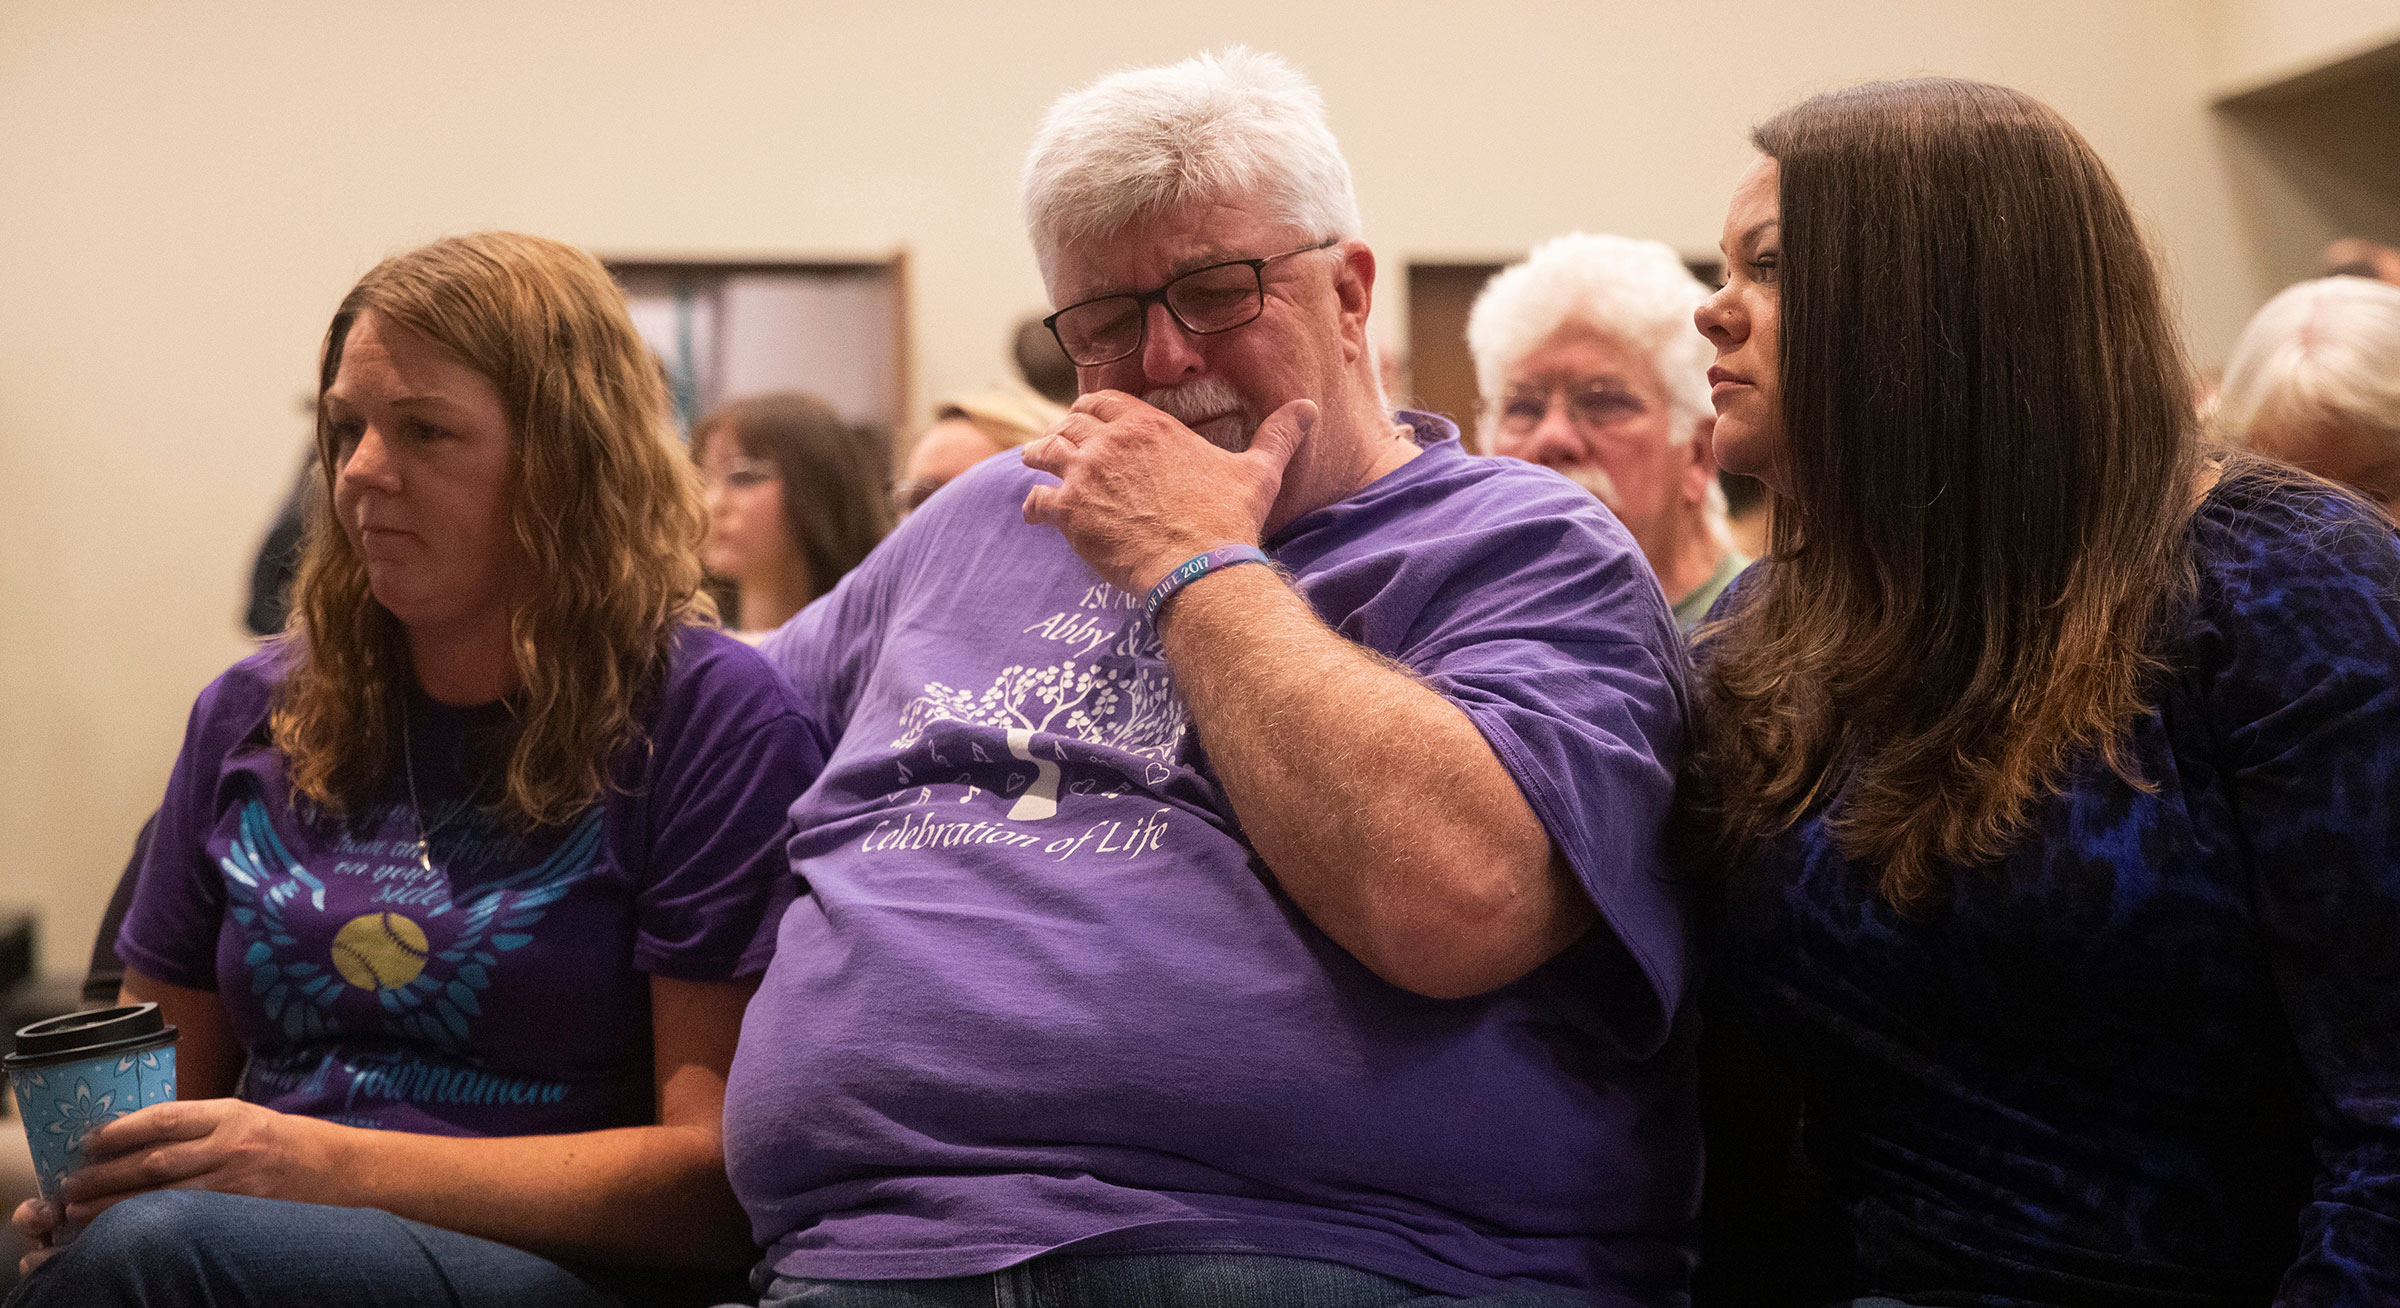 Members of Abby Williams' family attend a press conference addressing updates regarding the investigation of the murders of Abby Williams and Libby German, Monday, Monday, Oct. 31, 2022, at Delphi United Methodist Church in Delphi, Ind. (Alex Martin—Journal and Courier/USA TODAY/Reuters)